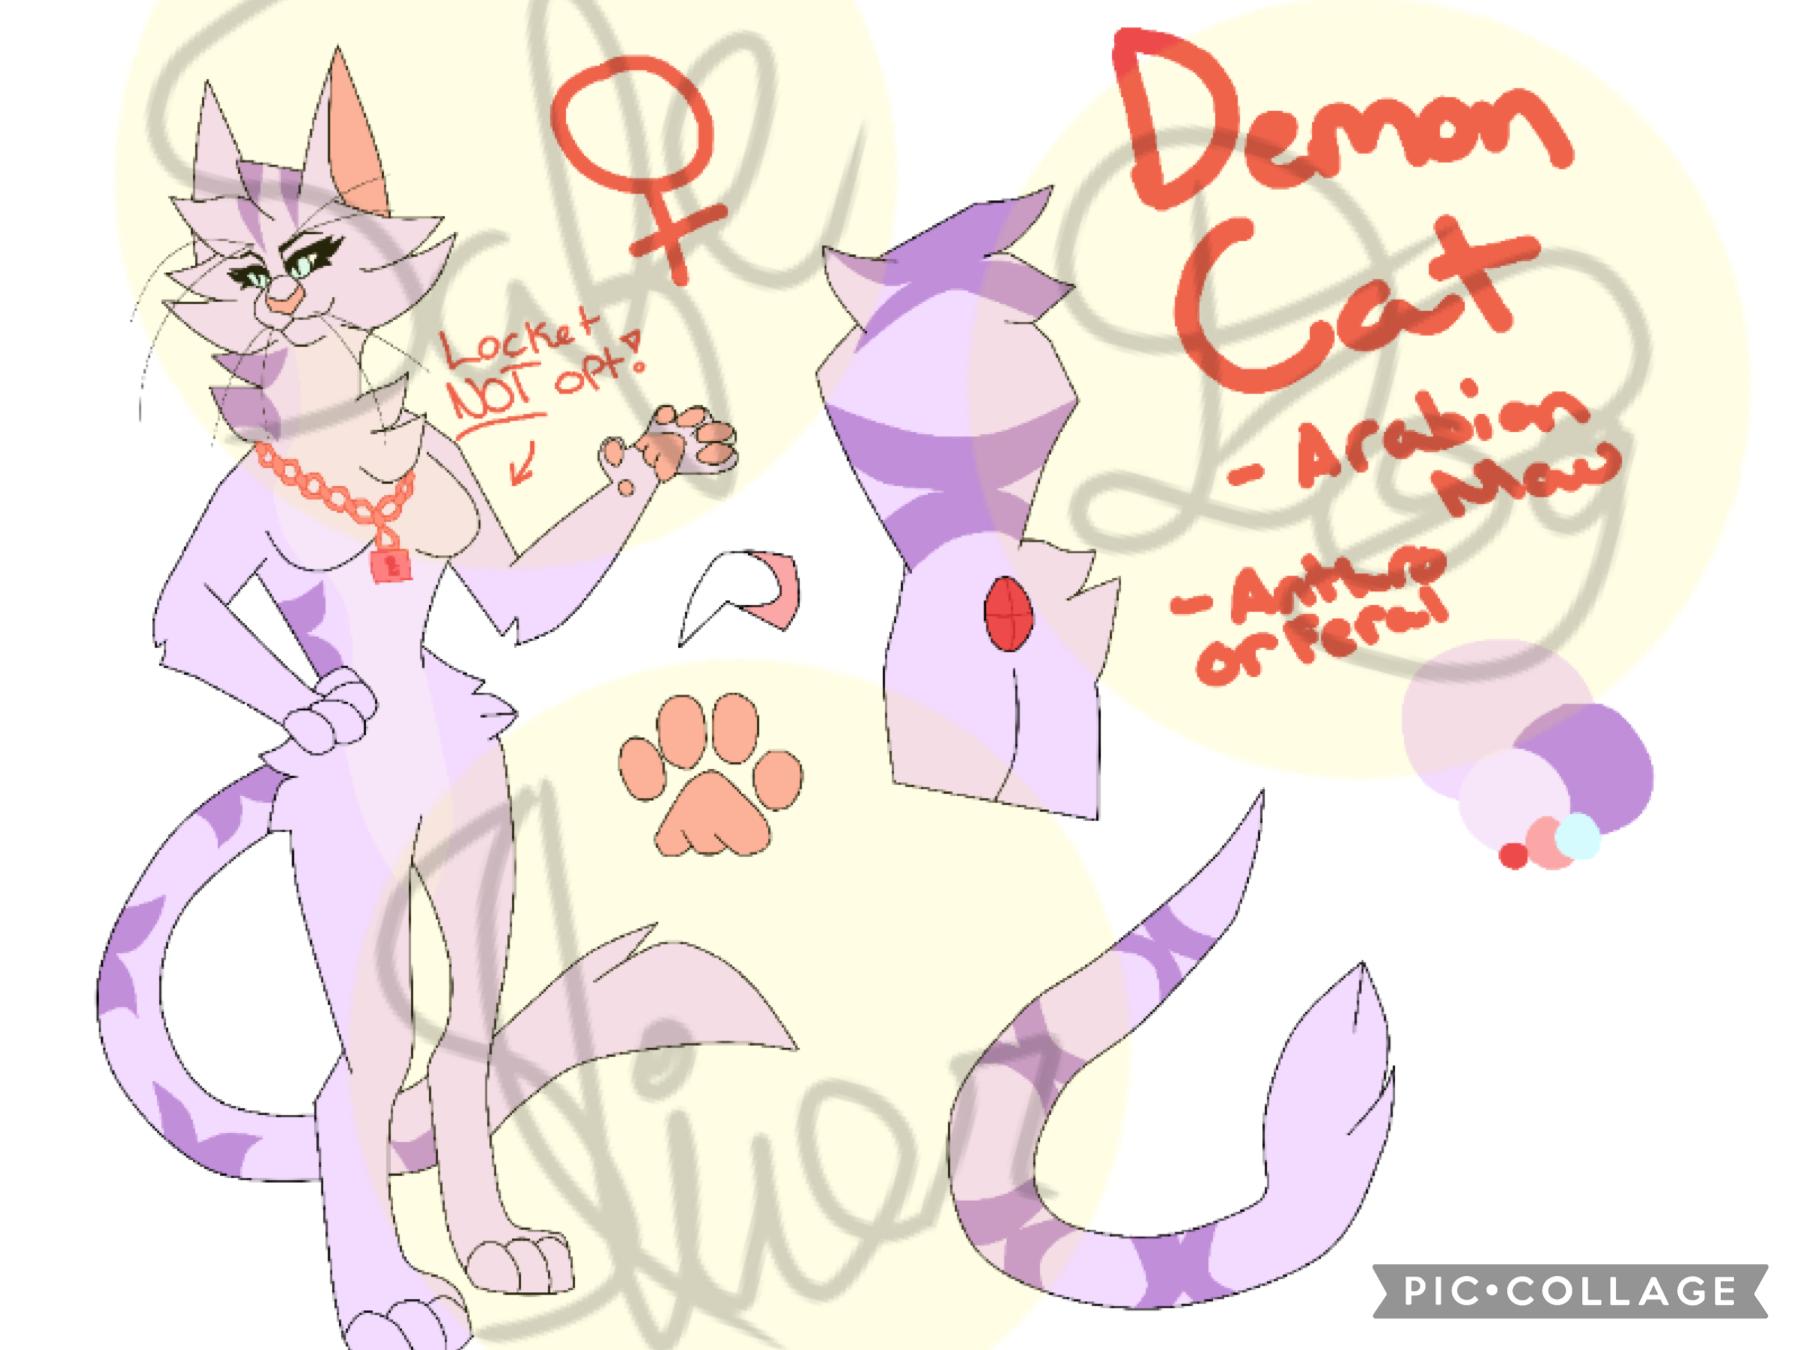 (🗝TAP!🗝)
DEMON CAT REF! 
I’ve been wanting to make more refs lately hhh I think they’re getting a bit better? Also I am SO EXCITED for pride month gotta lot of art planned >:)